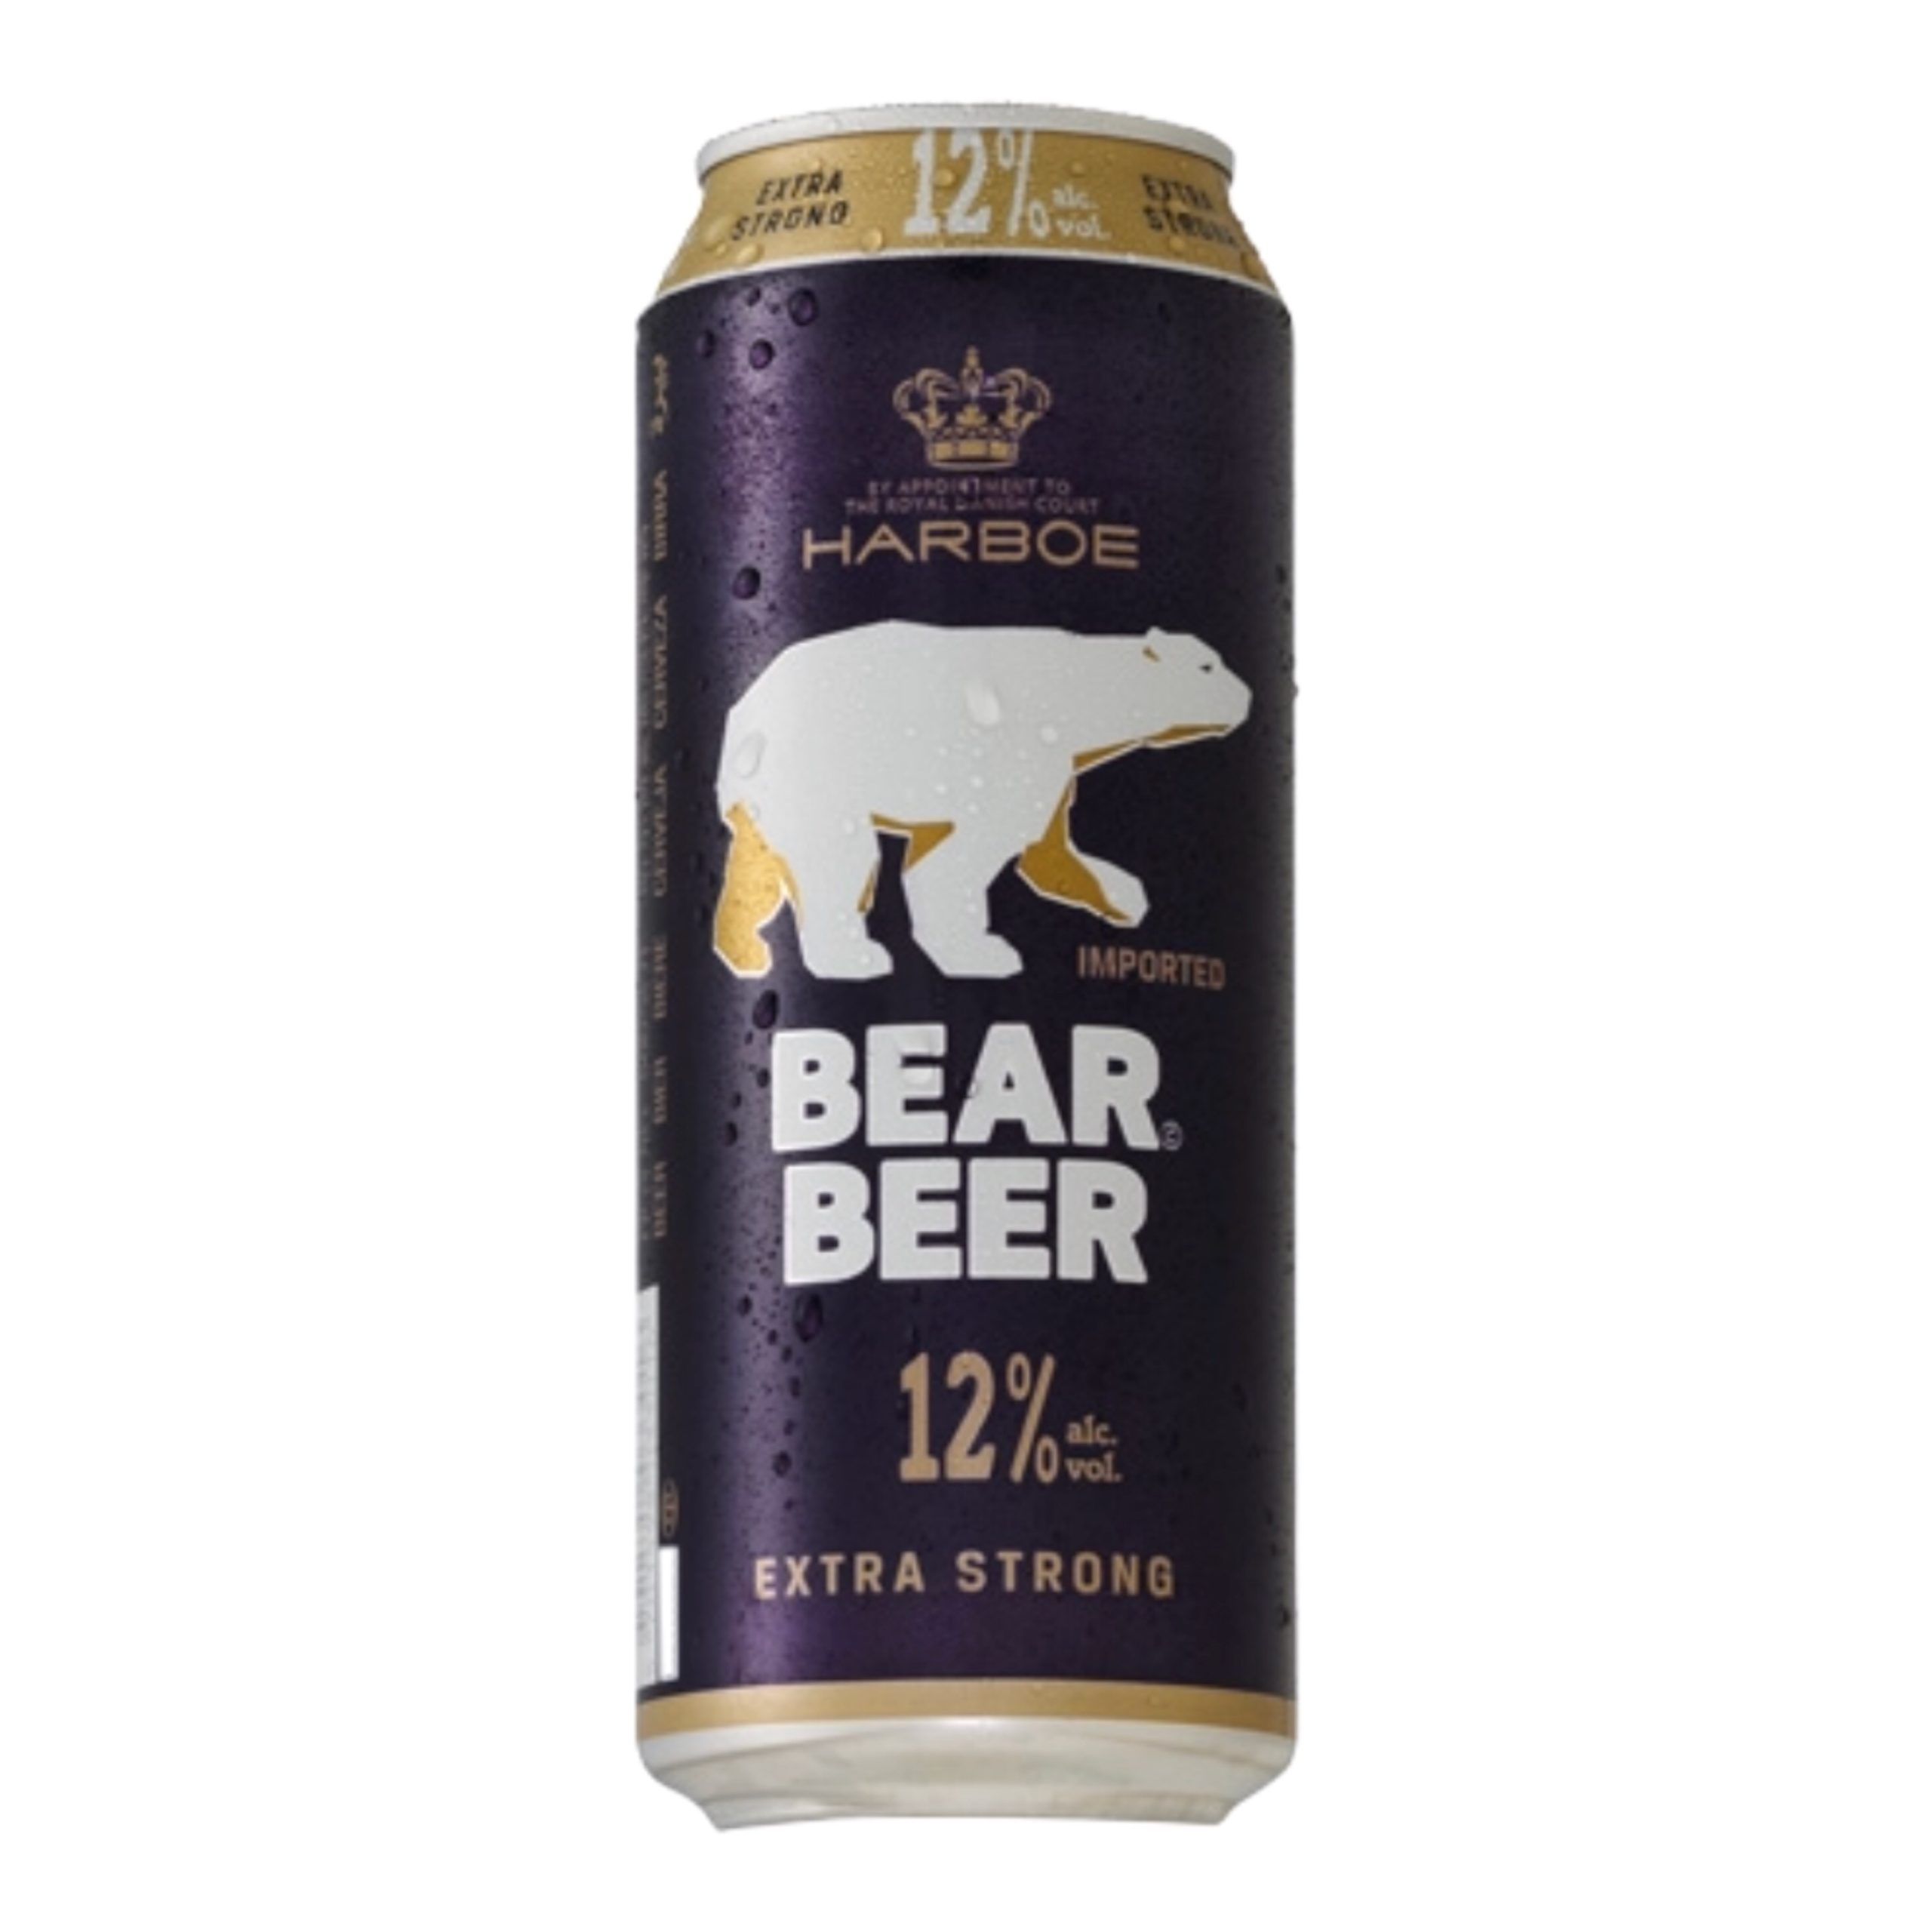 Strong beer. Bear Beer strong Lager пиво. Пиво Bear Beer 8.3. Пиво Беар бир Стронг лагер 8.3. Пиво Беар бир 0,45л ж/б.